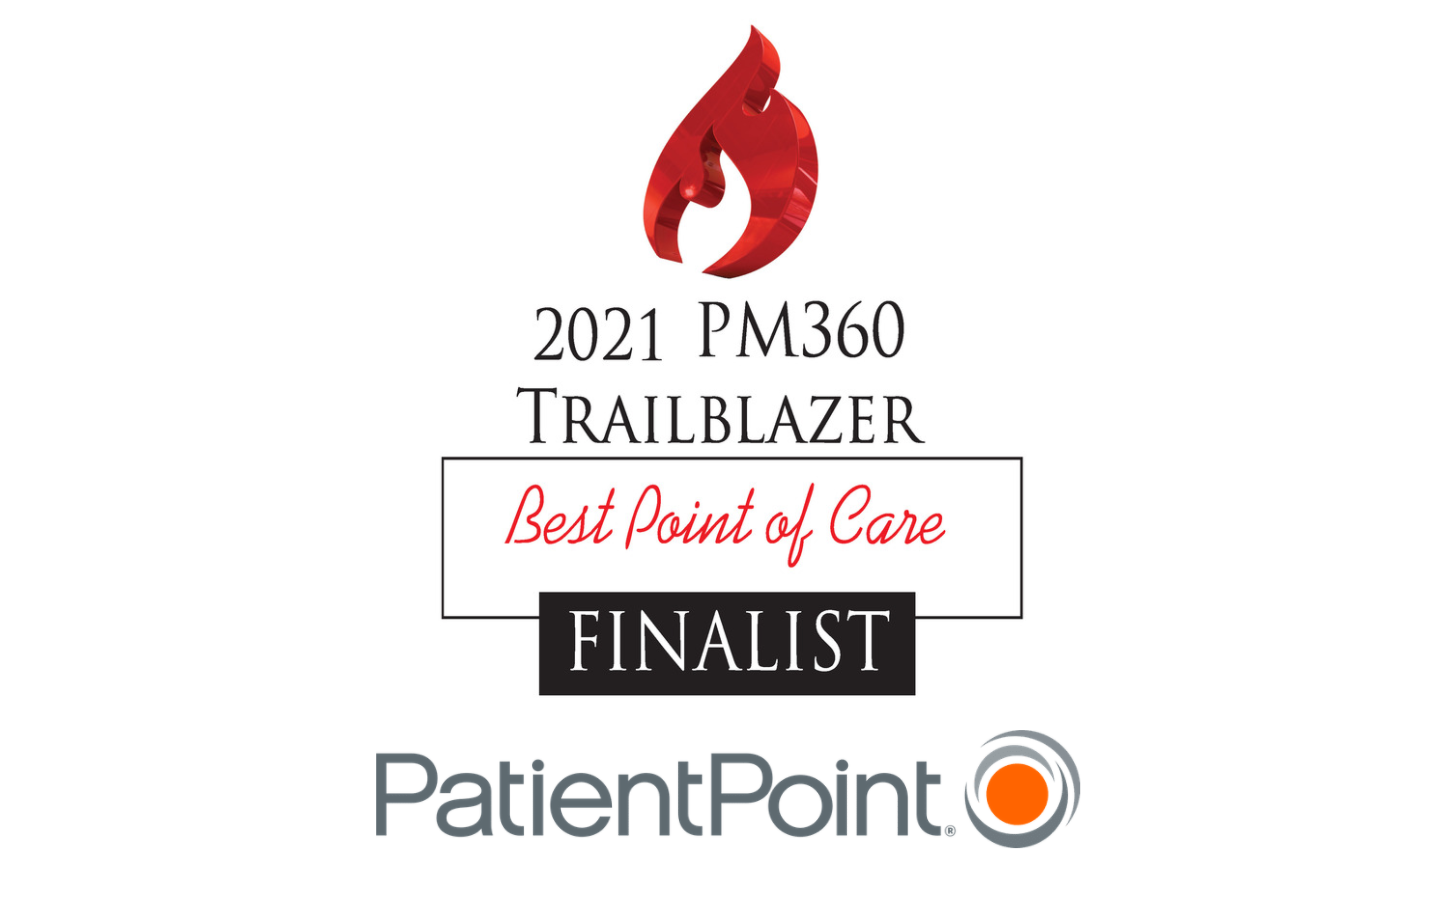 Stacked 2021 PM360 Trailblazer Awards and PatientPoint logos